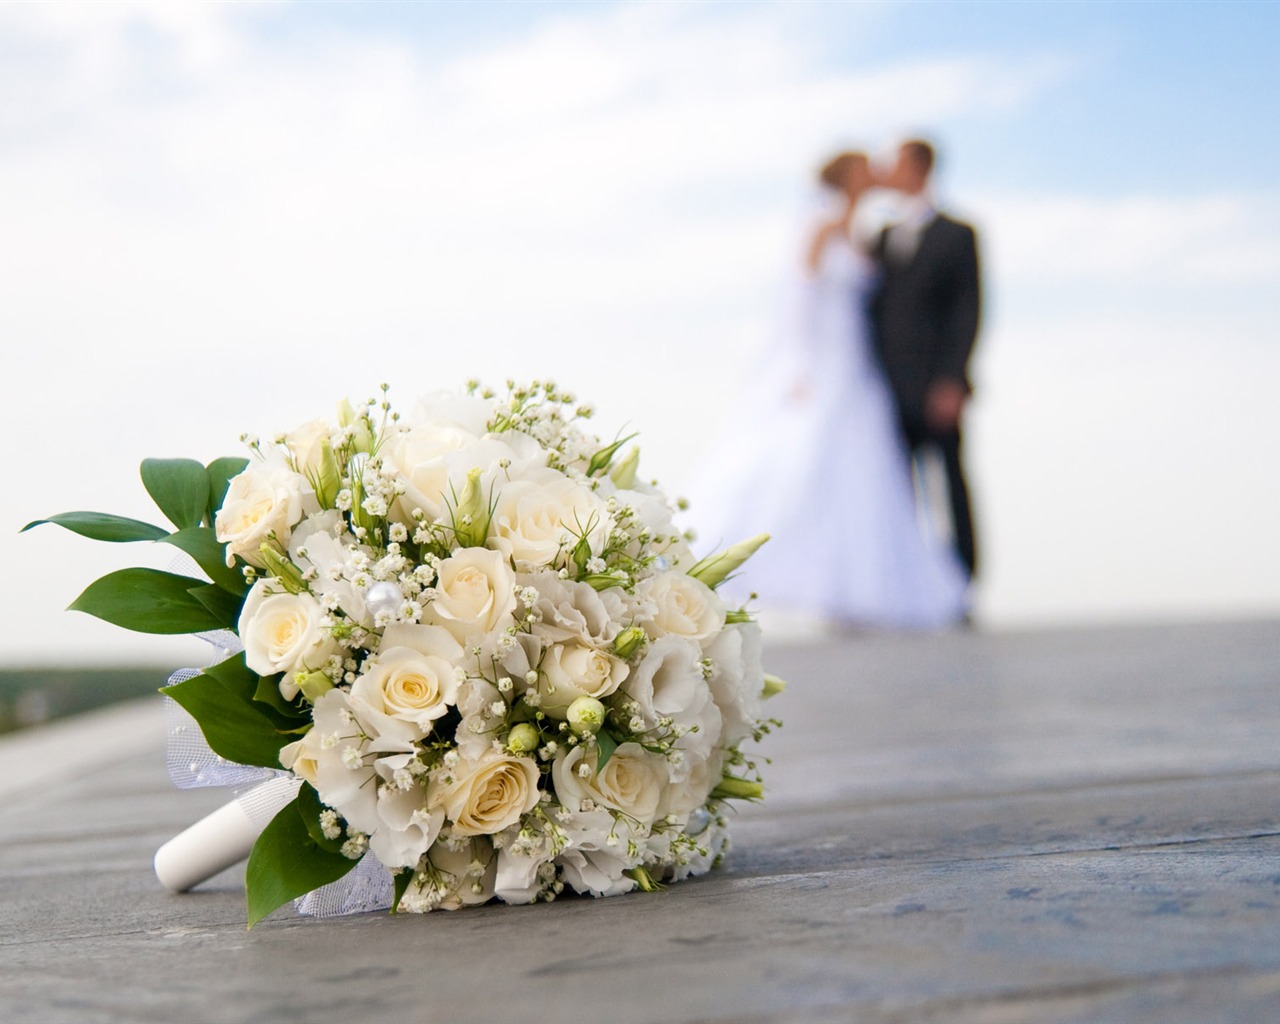 Weddings and Flowers wallpaper (2) #18 - 1280x1024